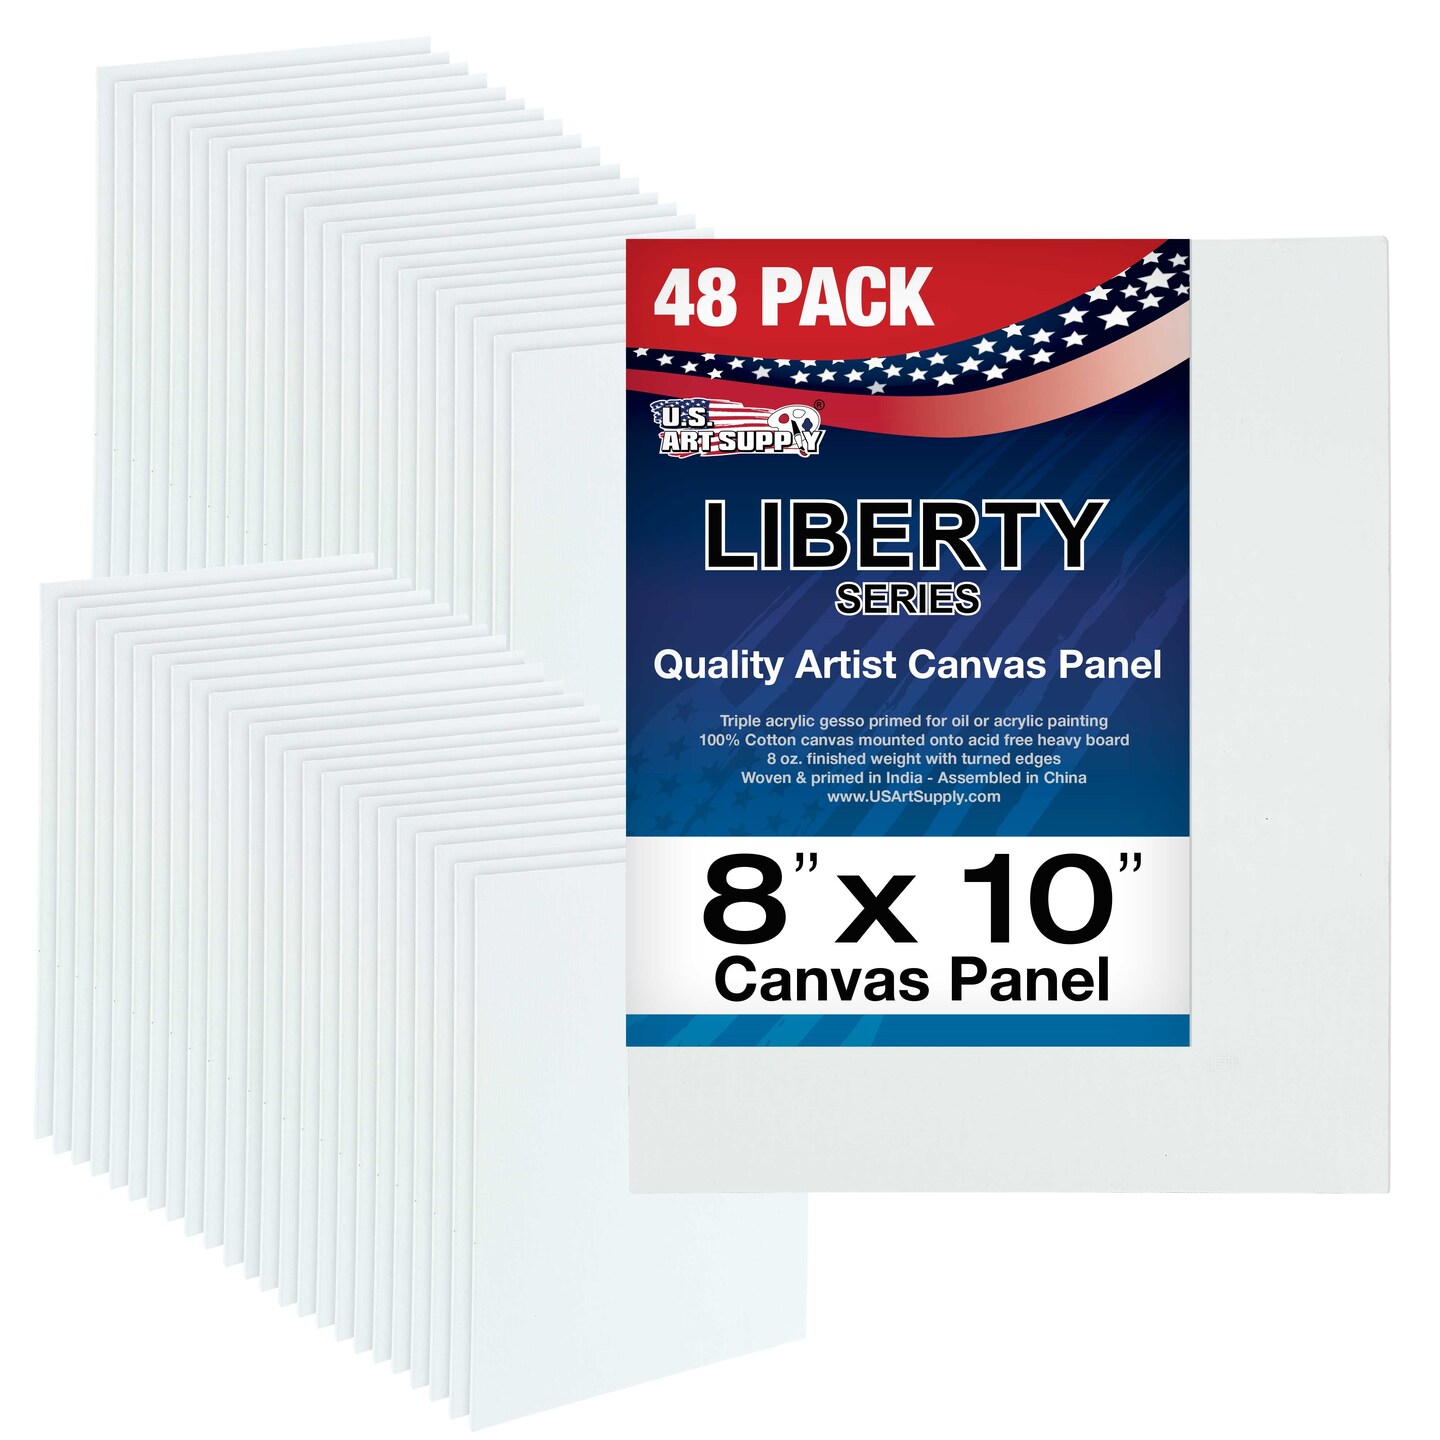 6 Packs: 5 ct. (30 total) Value Pack Canvas Panels by Artist's